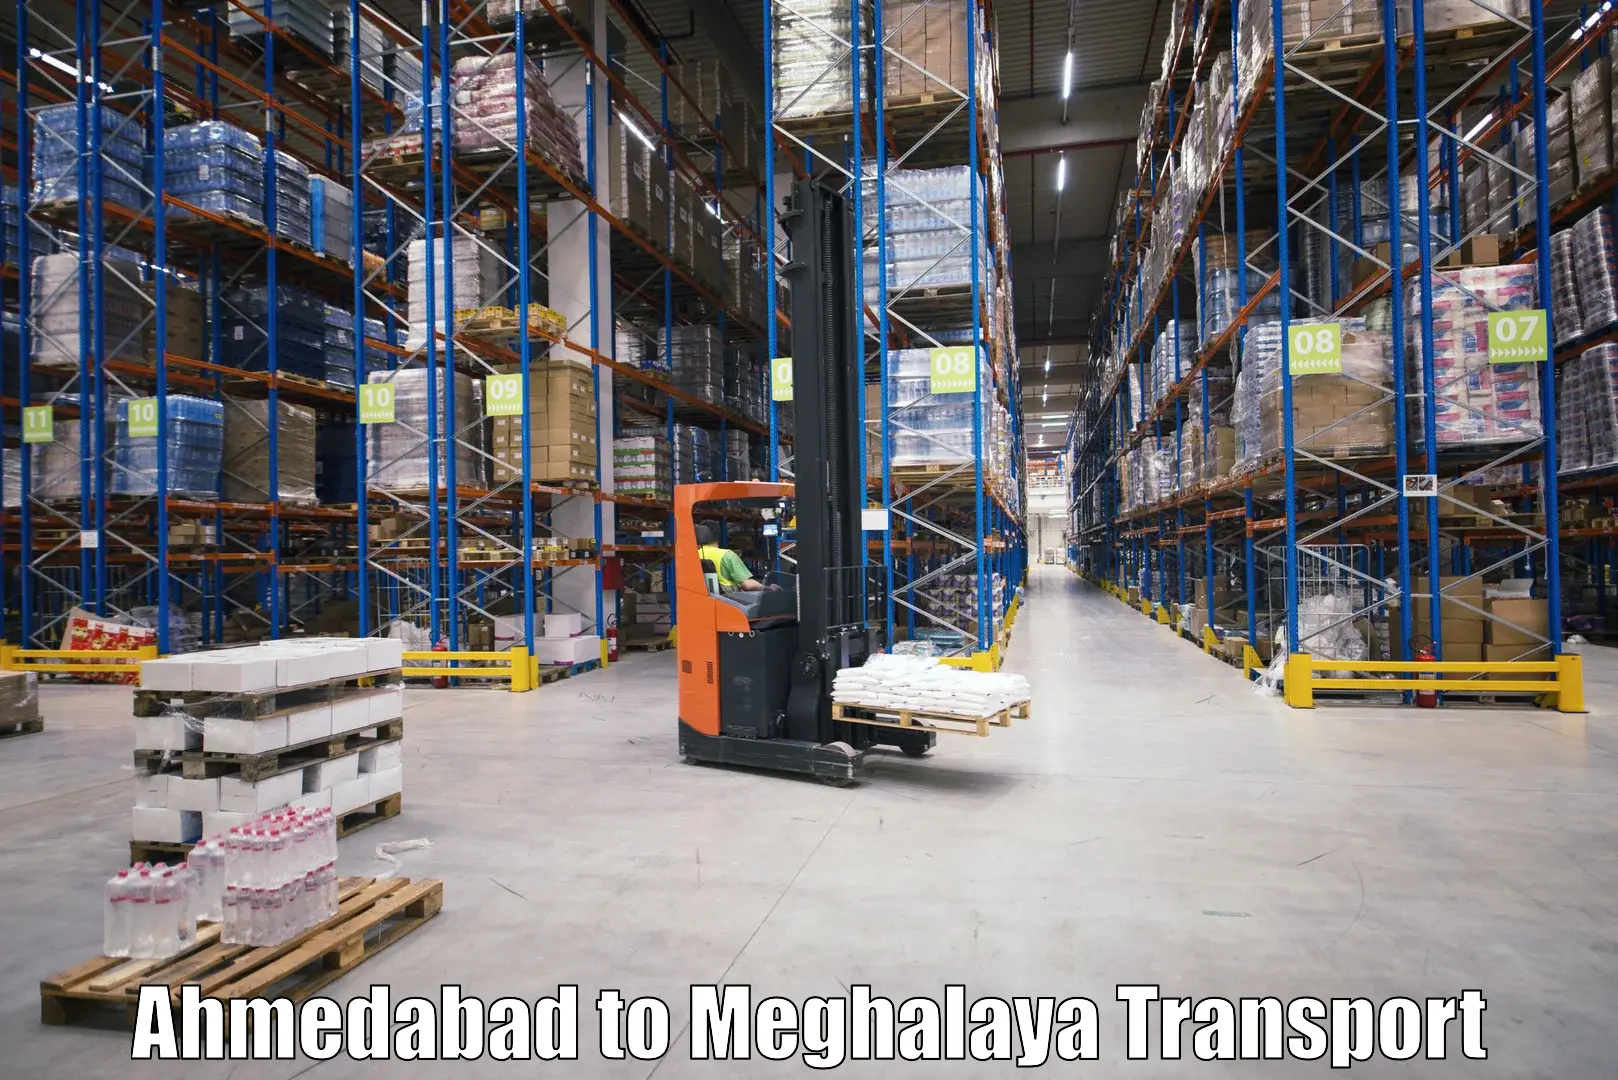 Truck transport companies in India Ahmedabad to Dkhiah West